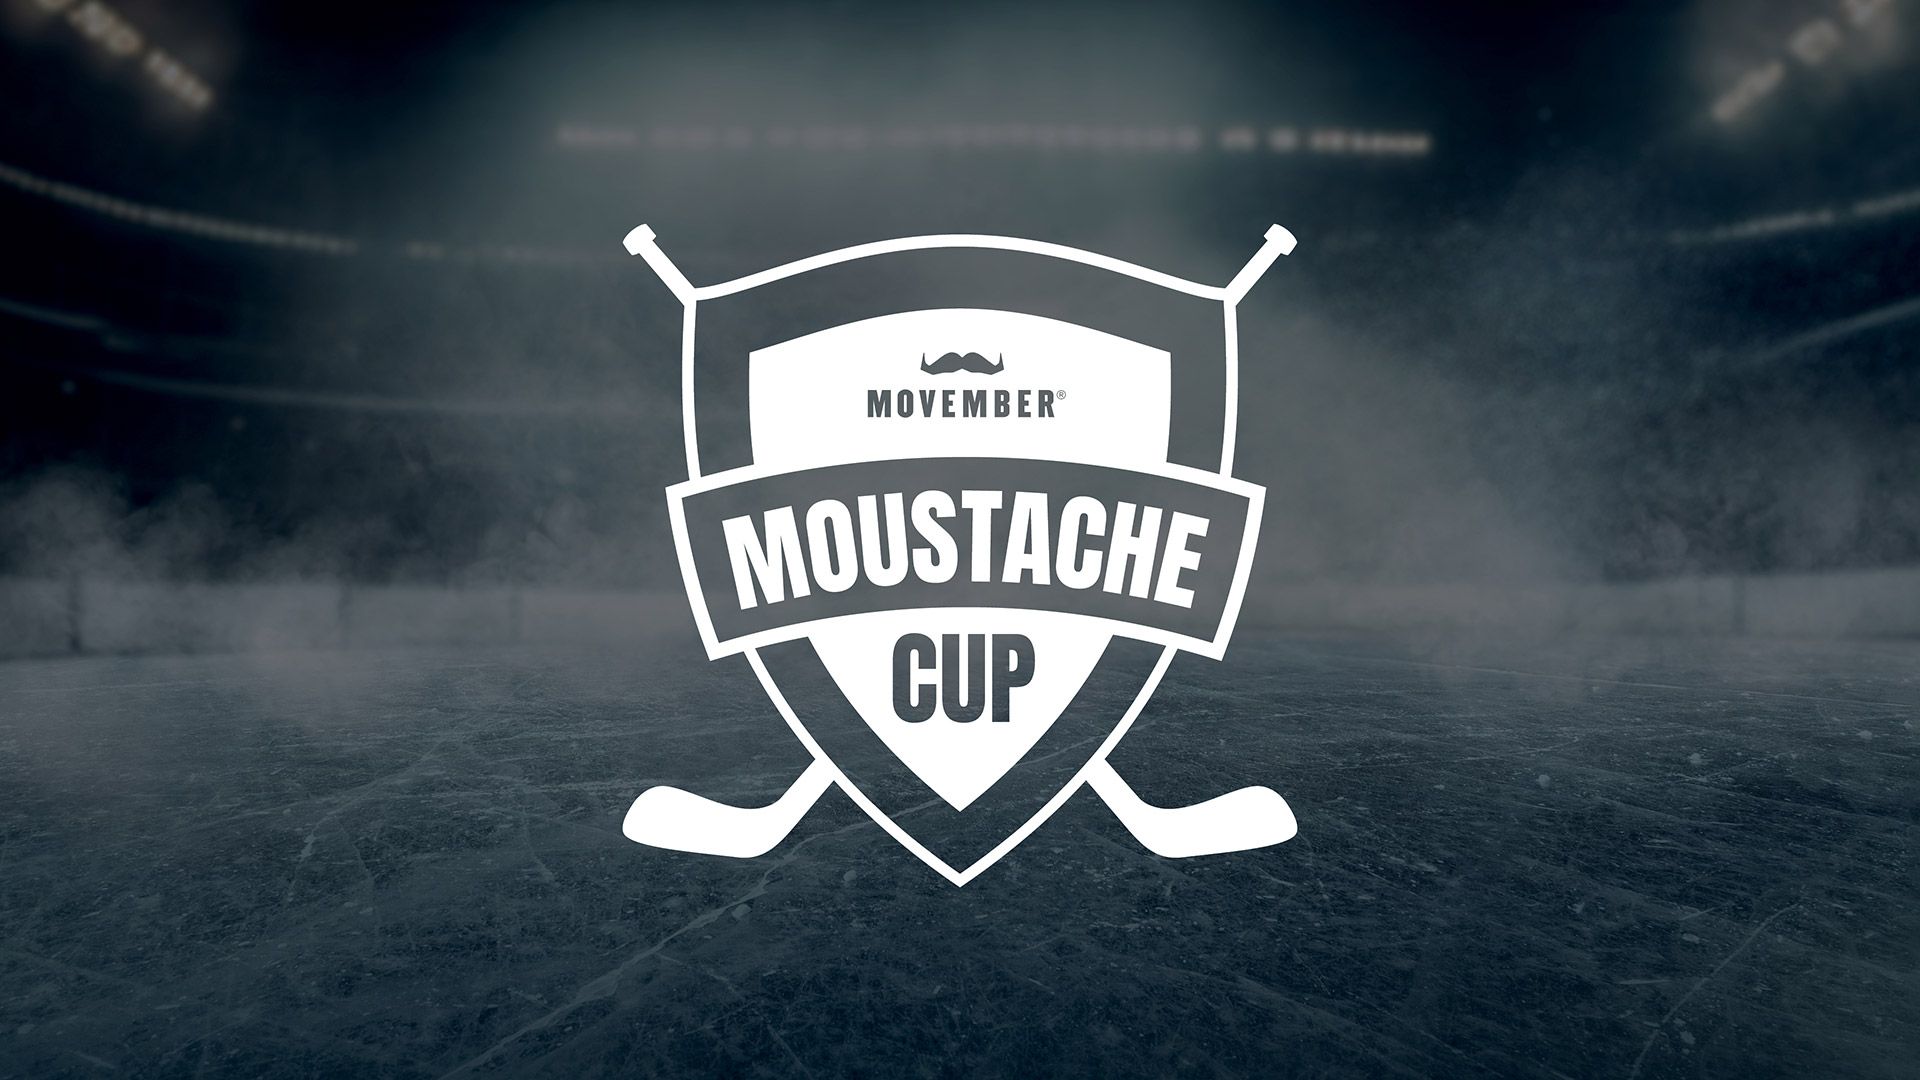 A logo that says "The Moustache Cup", with two hockey sticks and the Movember moustache, overlayed on a hockey rink